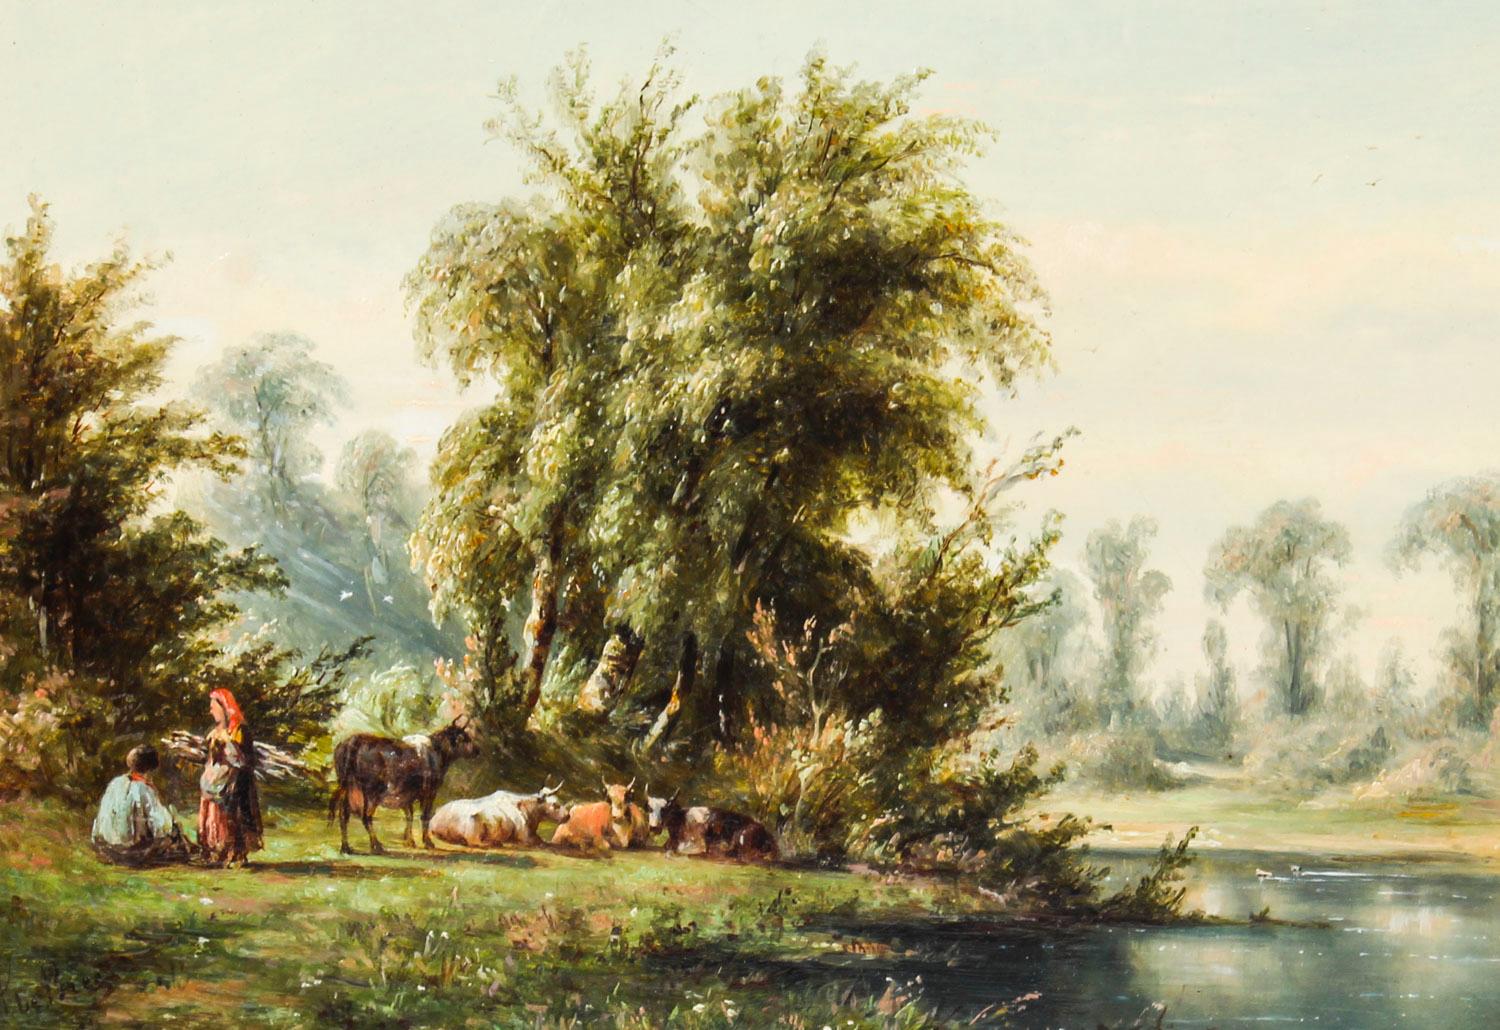 A charming antique Victorian landscape oil painting on board by Anthony De Bree, circa 1880 in date.

The painting features a rural scene with country folk collecting wood and a herd of cows resting in the shade of a large tree on the banks of a